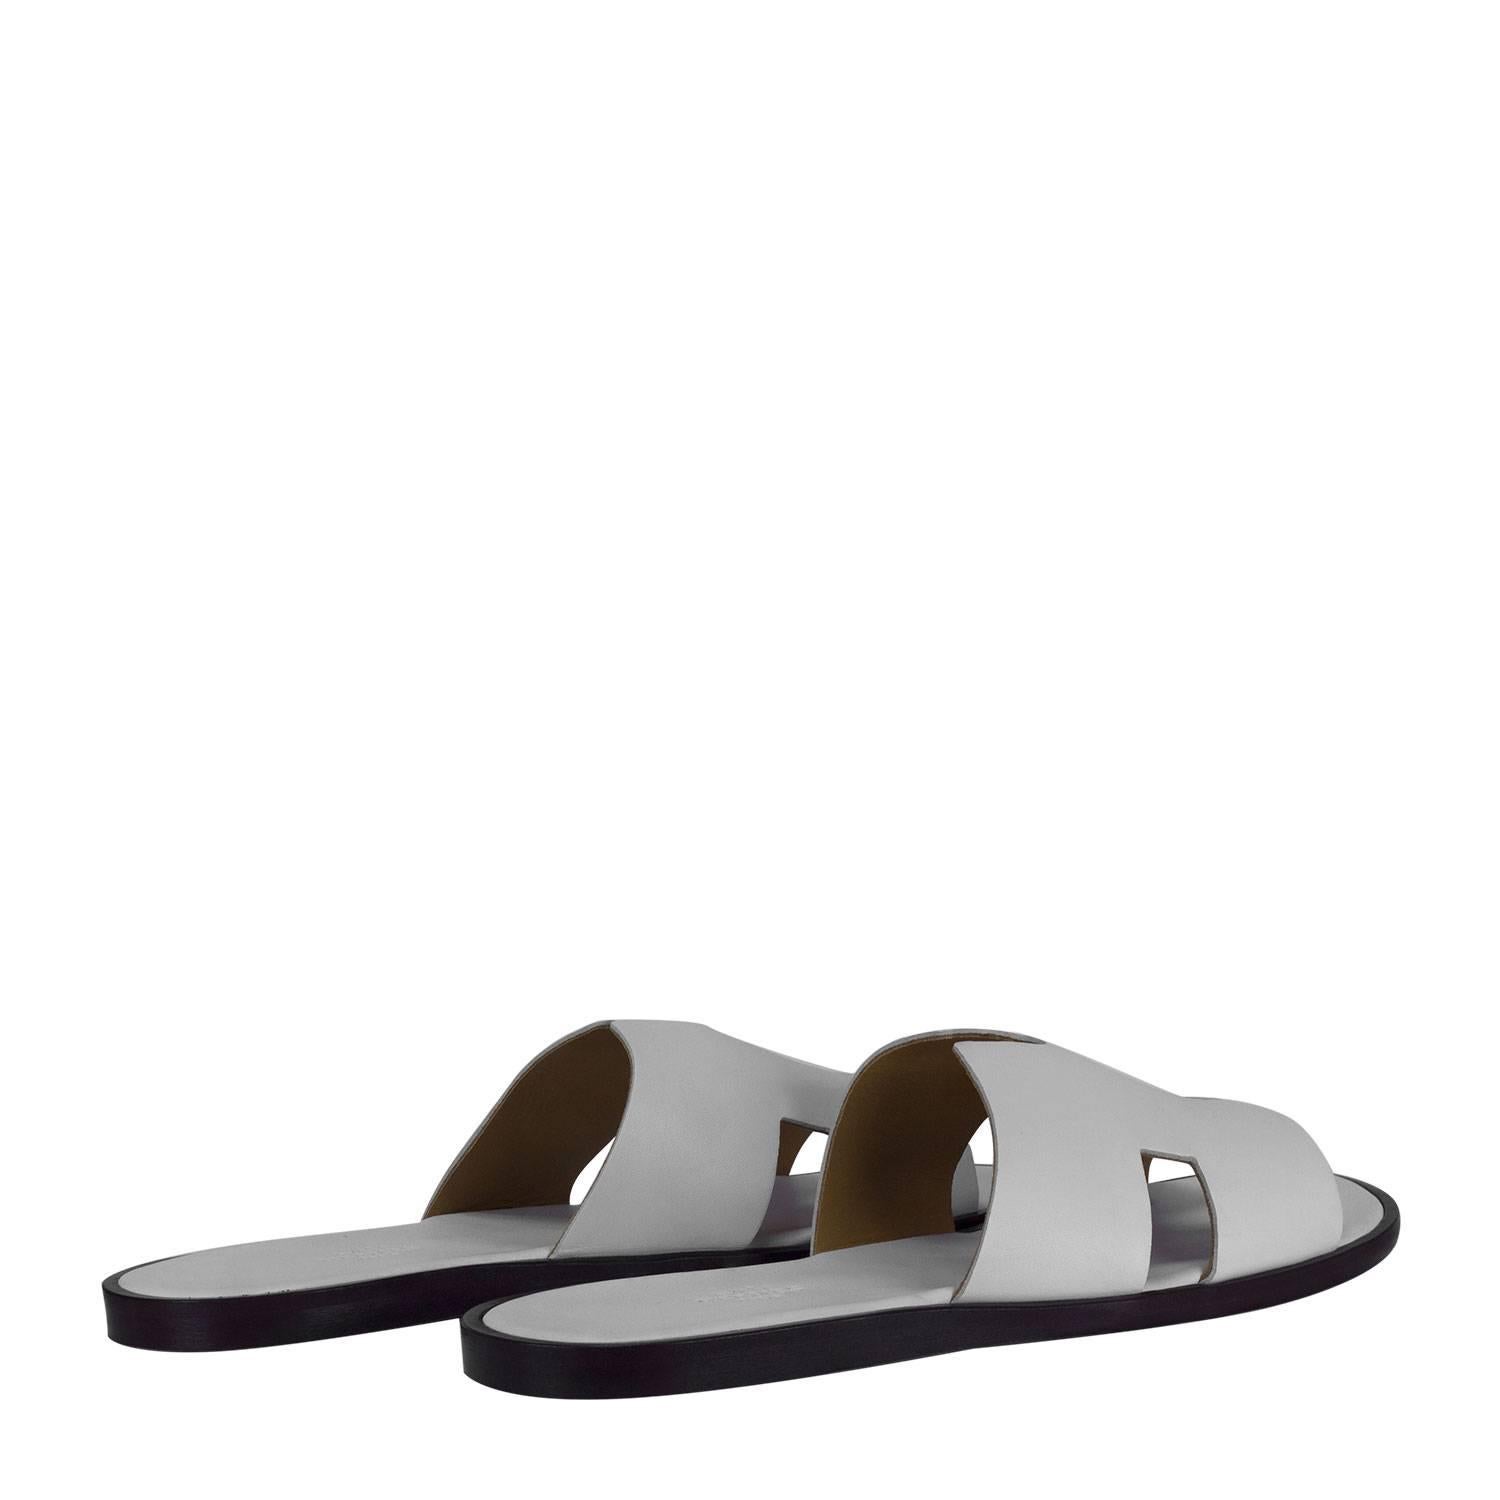 Hermes Men Sandals "Izmir" Veau Leather White Color 40 Size 2017

Pristine condition. Pre-owned and never used.

Bought it in Hermes store in 2017

Composition: Leather.

Model: Izmir.

Size: 40 EUR / 6.5 USA.

Color: 01